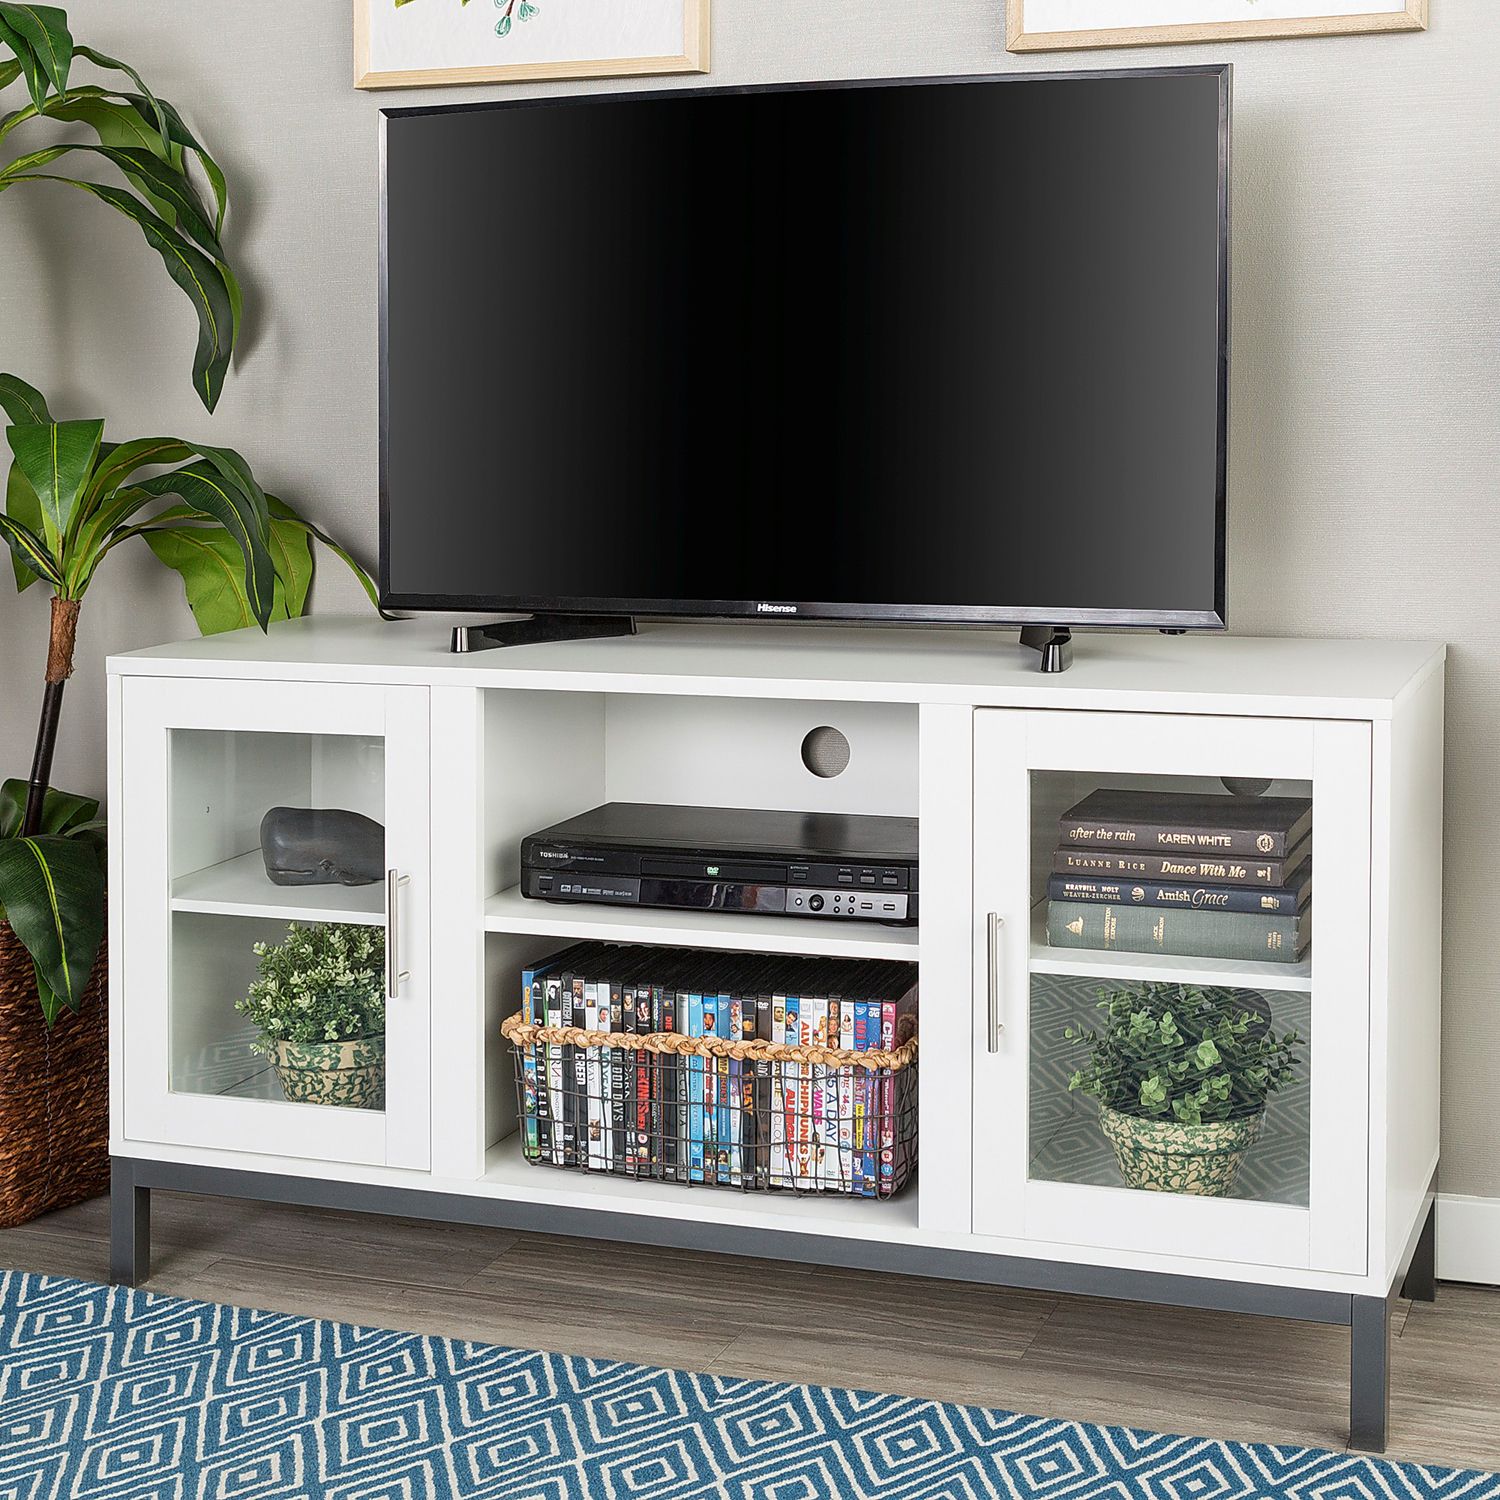 Avenue Wood Tv Stand With Metal Legs – Pier1 Throughout Metal And Wood Tv Stands (View 5 of 15)